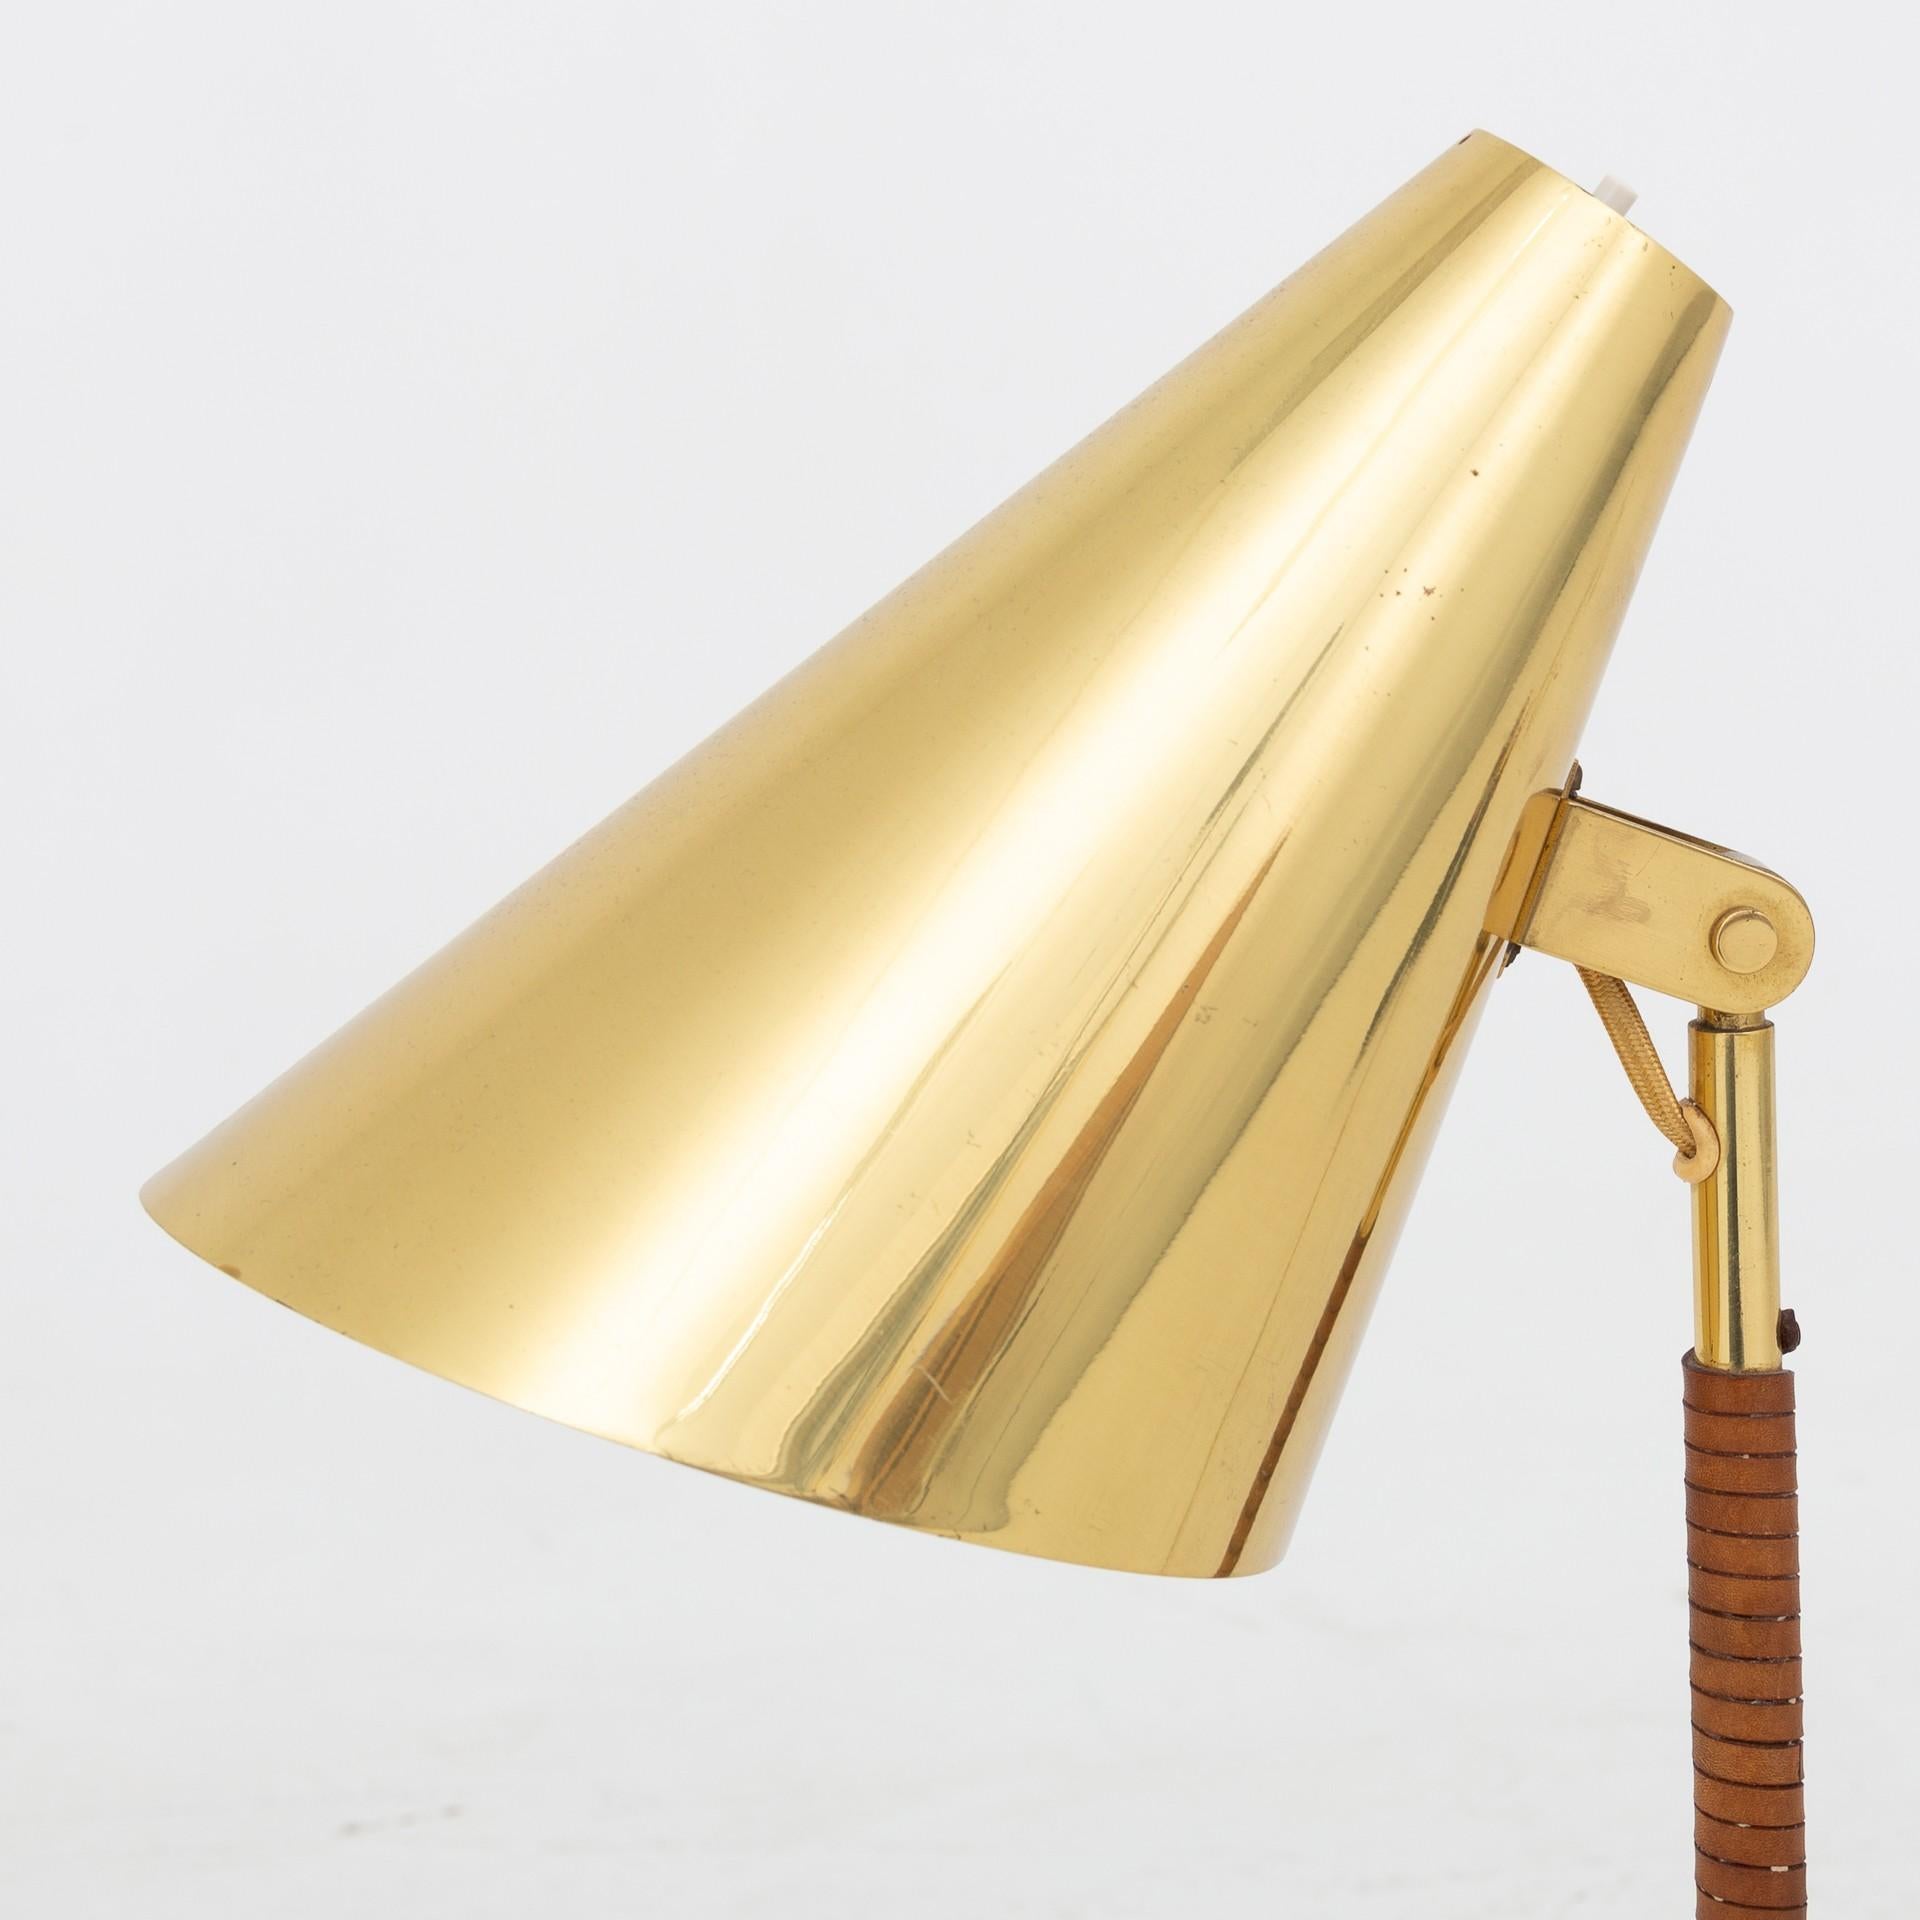 Finnish Rare Horseshoe Table Lamp in Brass by Paavo Tynell